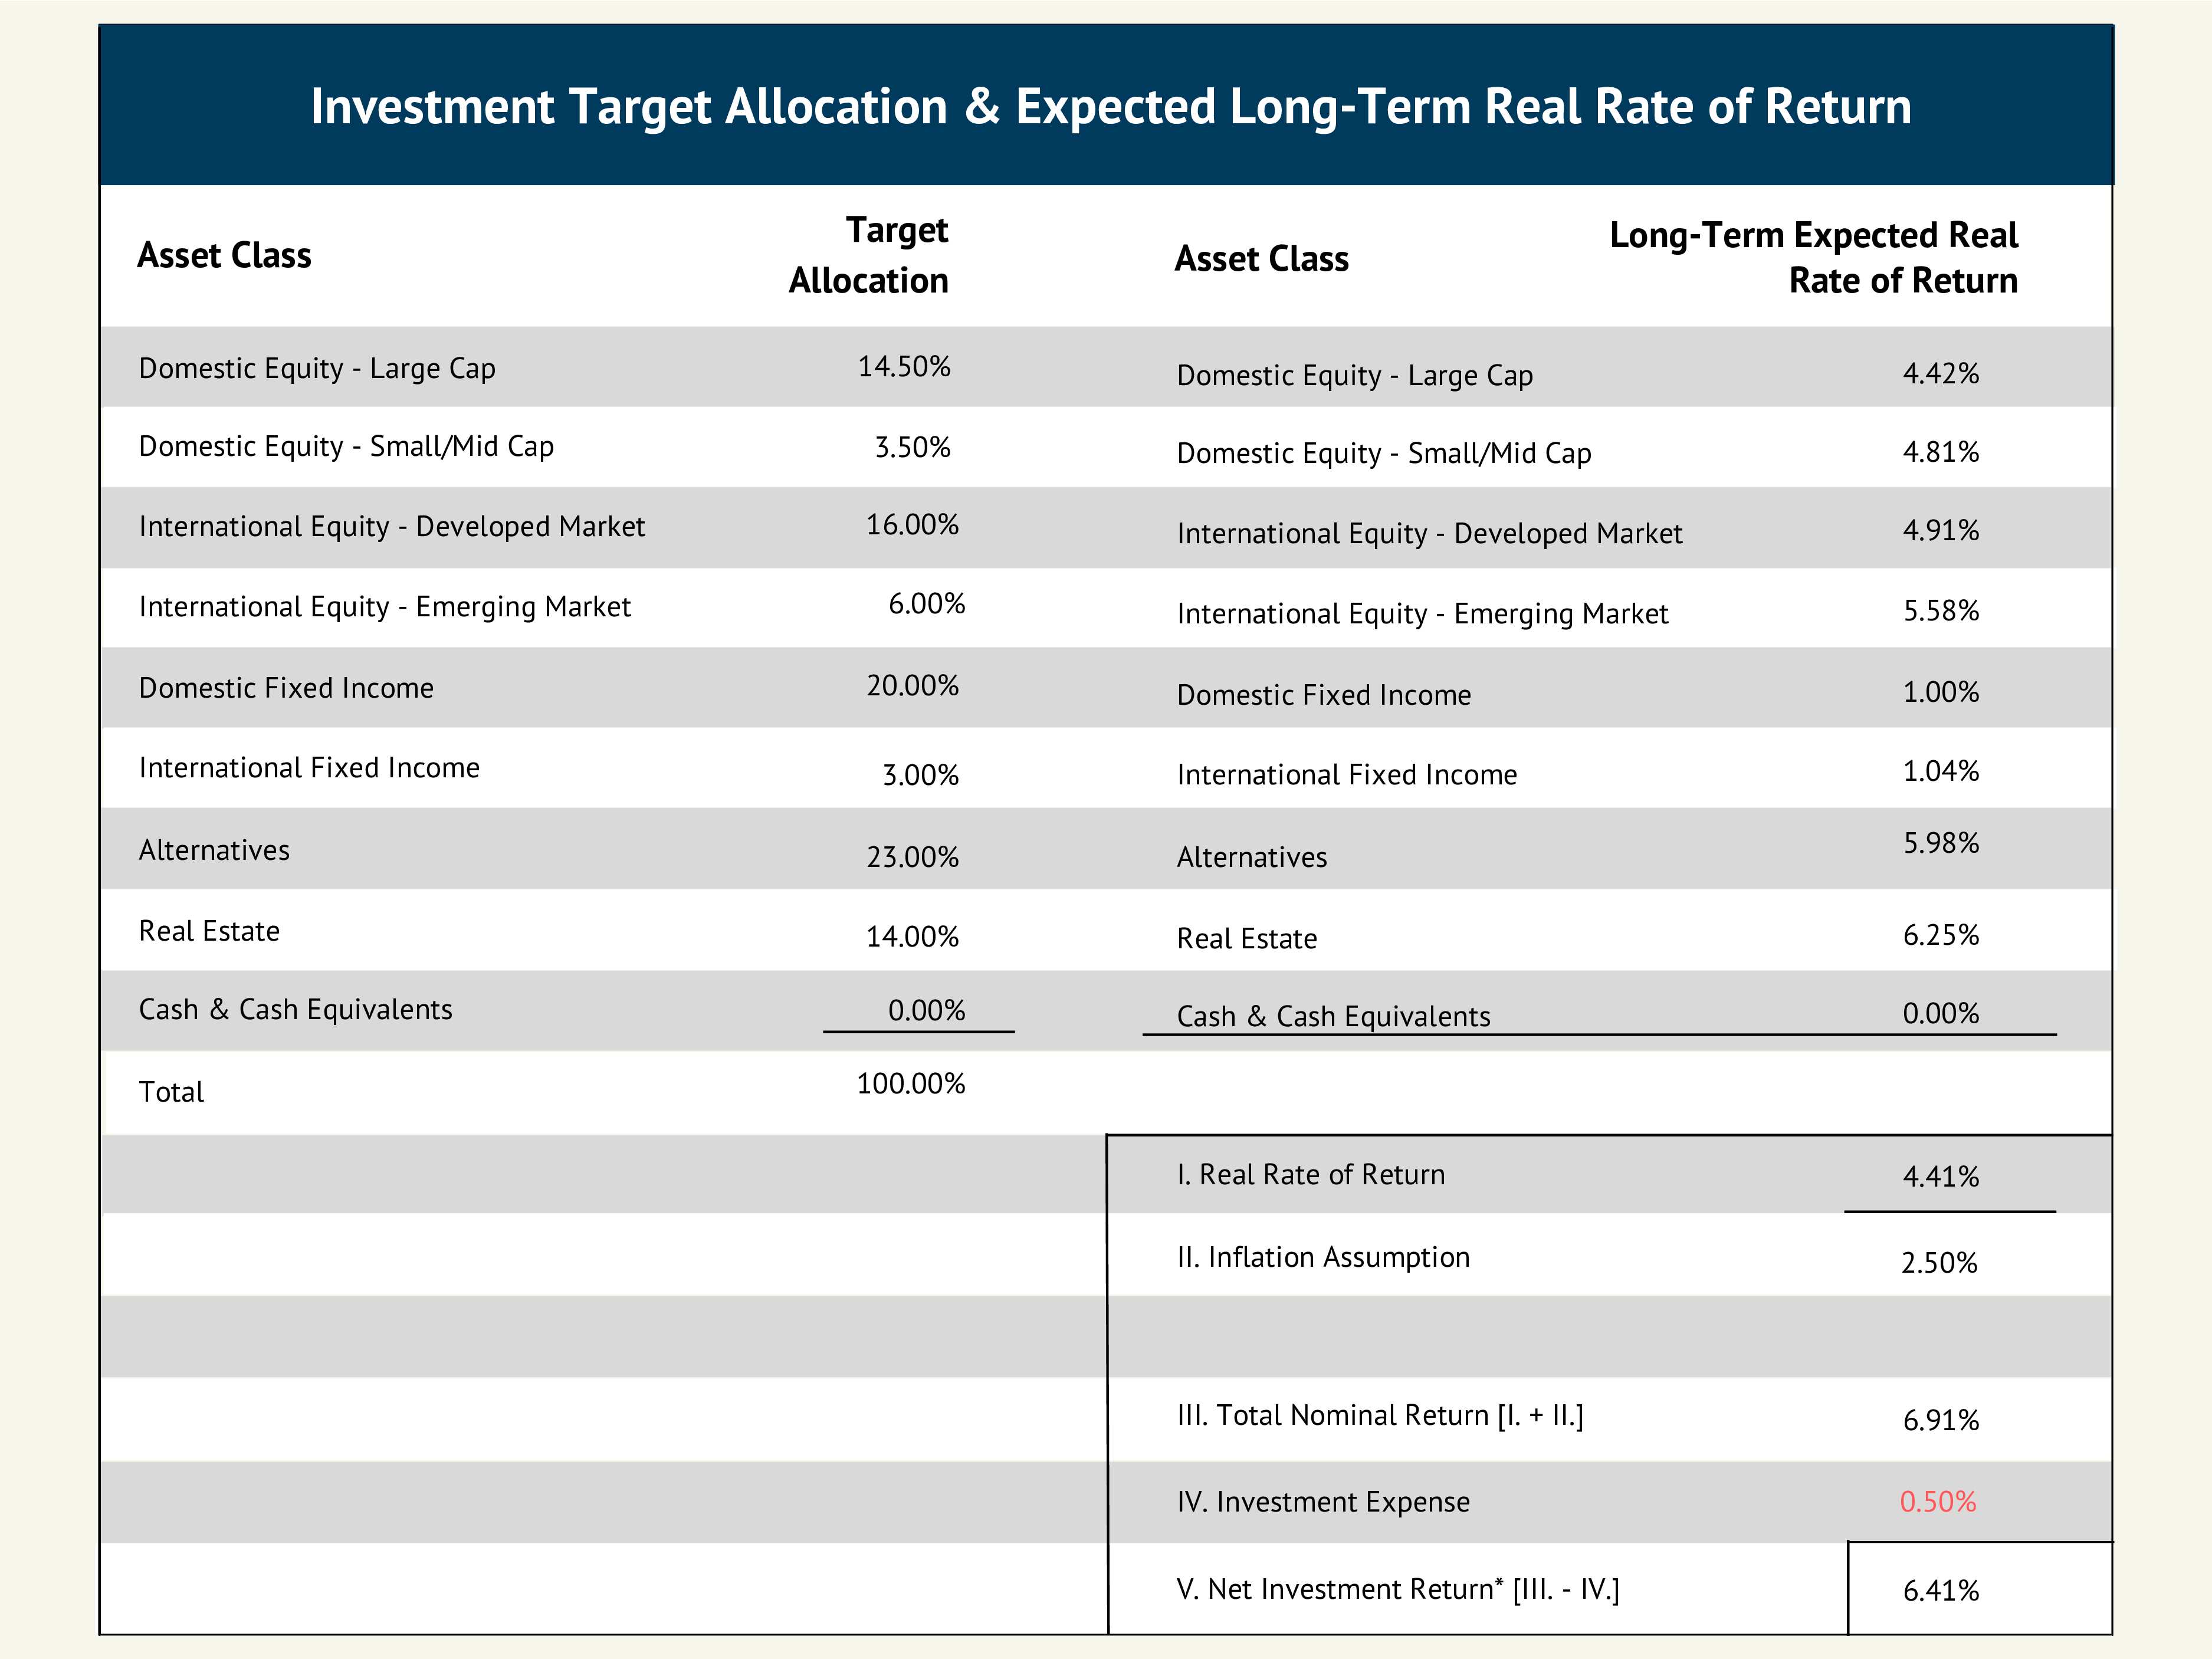 Investment Target Allocation and expected long-term real rate of return calculations